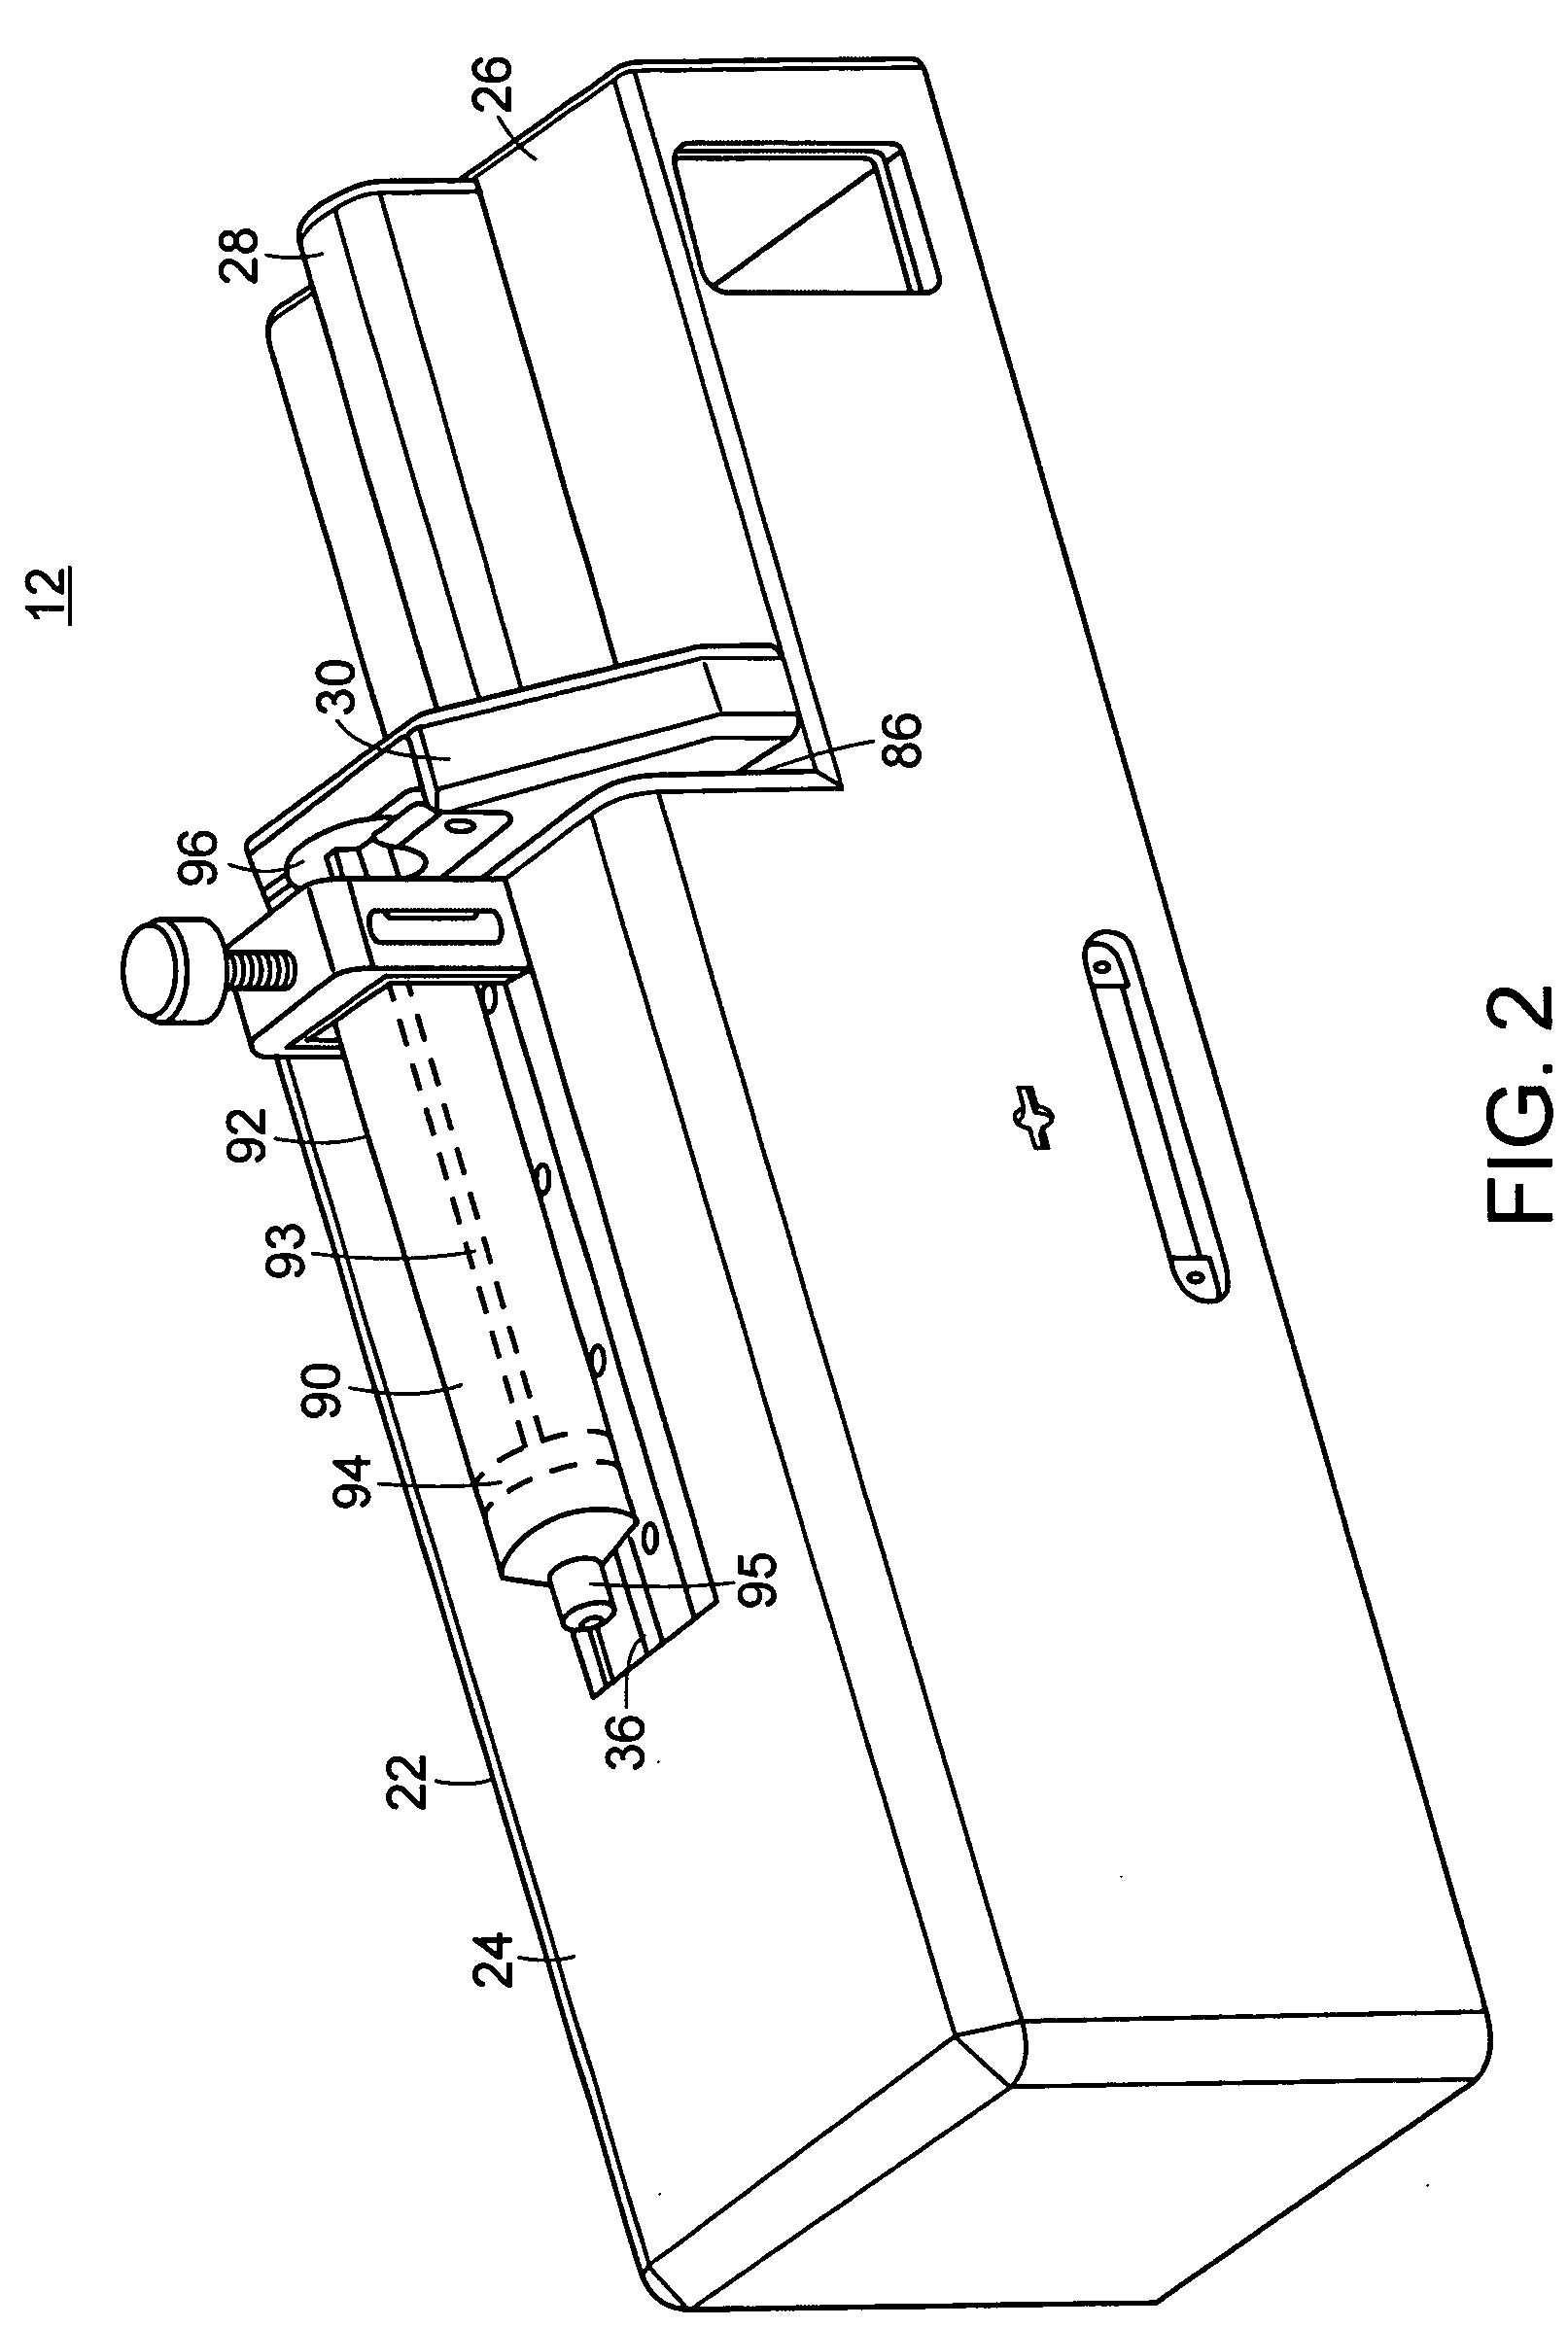 Drug infusion device for neural axial and peripheral nerve tissue identification using exit pressure sensing